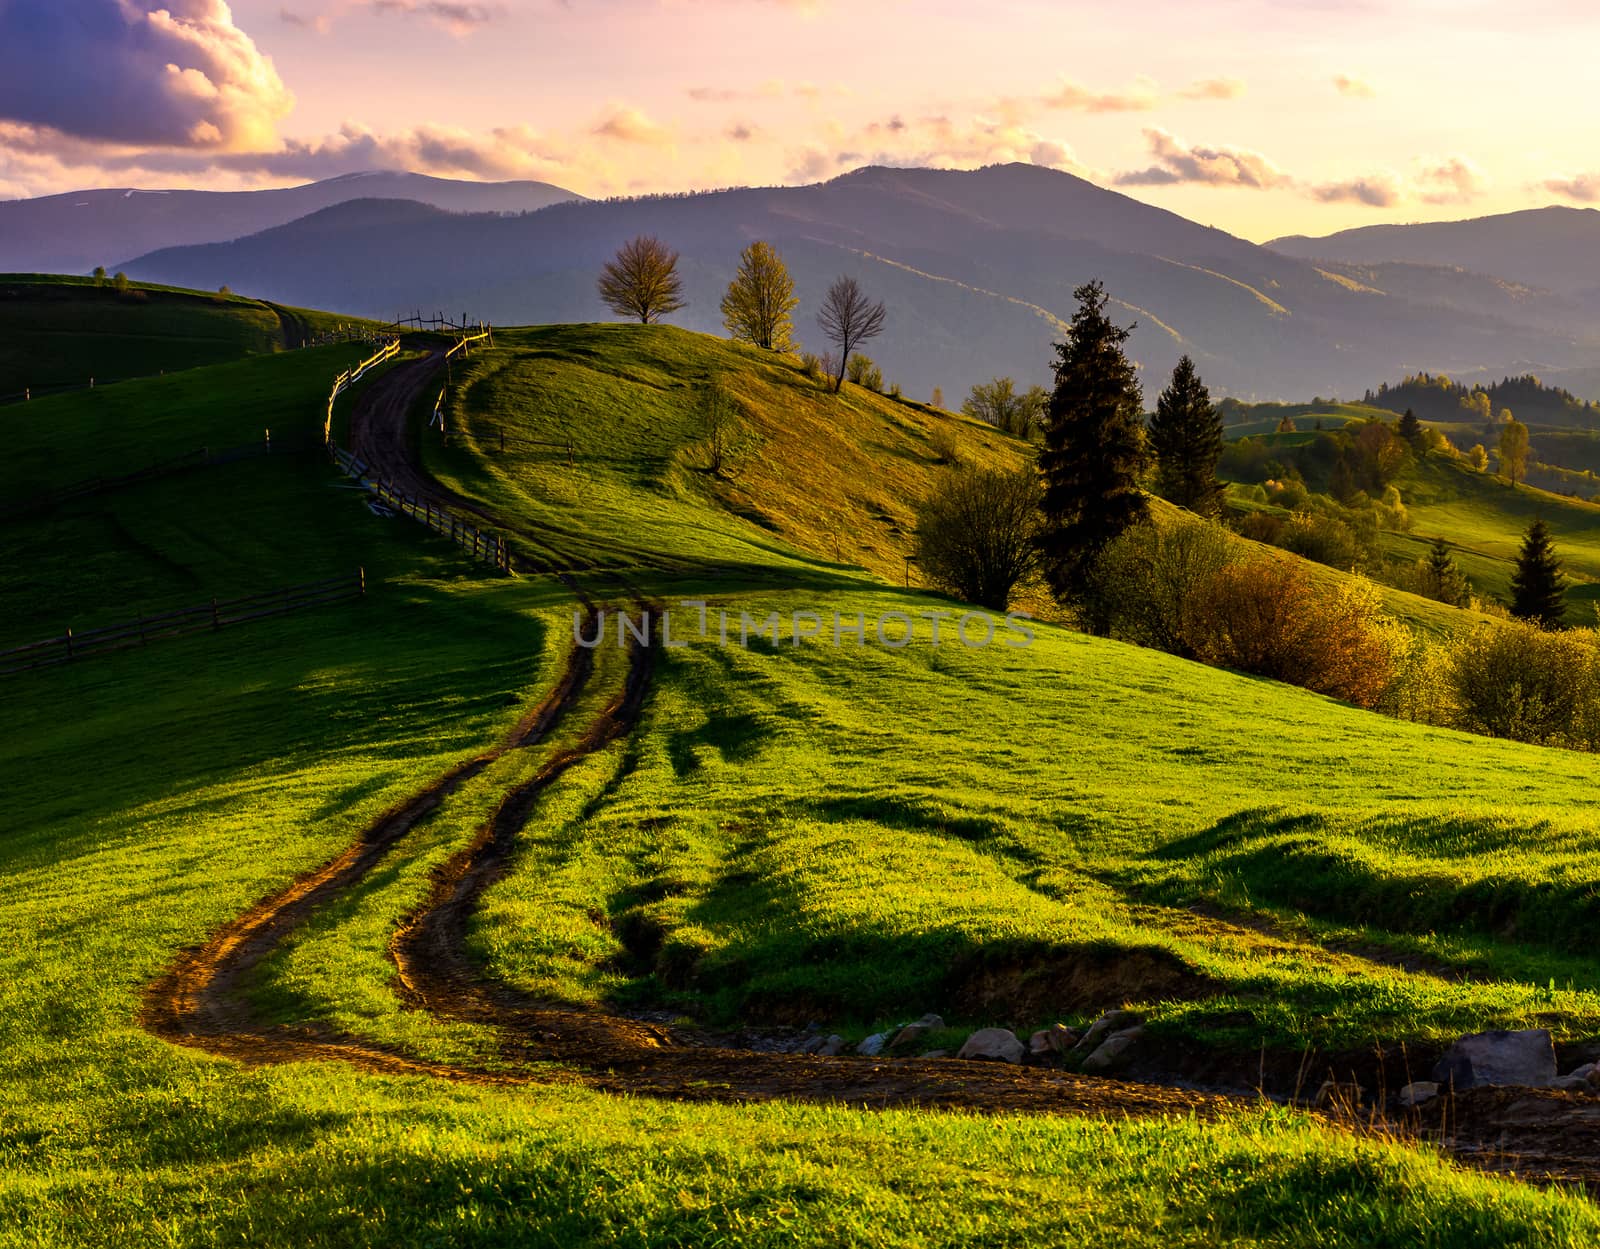 road through green hills at sunset. beautiful springtime rural landscape in mountains under the sky with pink clouds. wooden fence on top of a hill